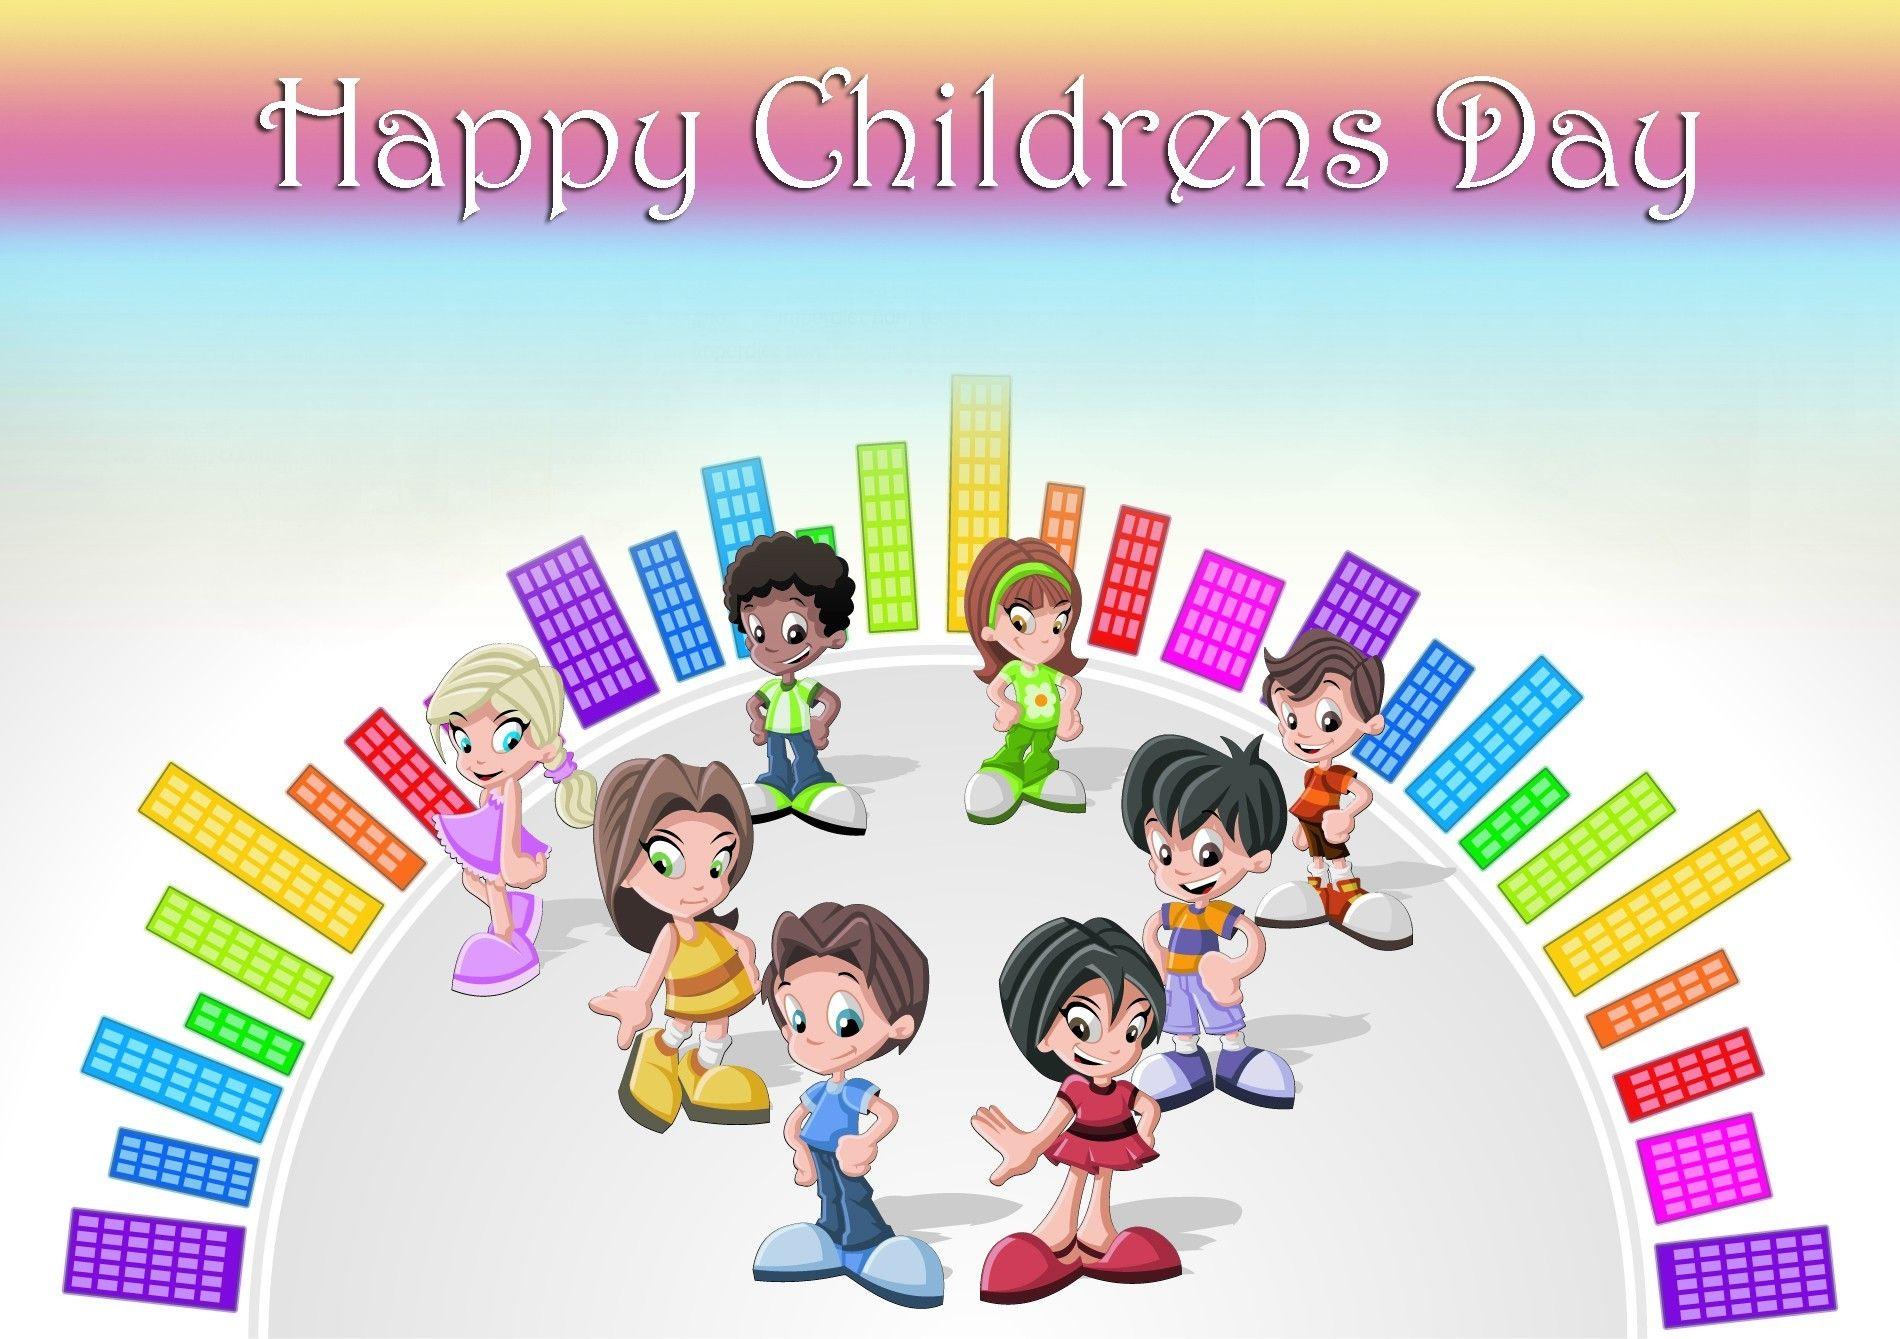 Happy Childrens day HD image Happy Childrens Day, HD